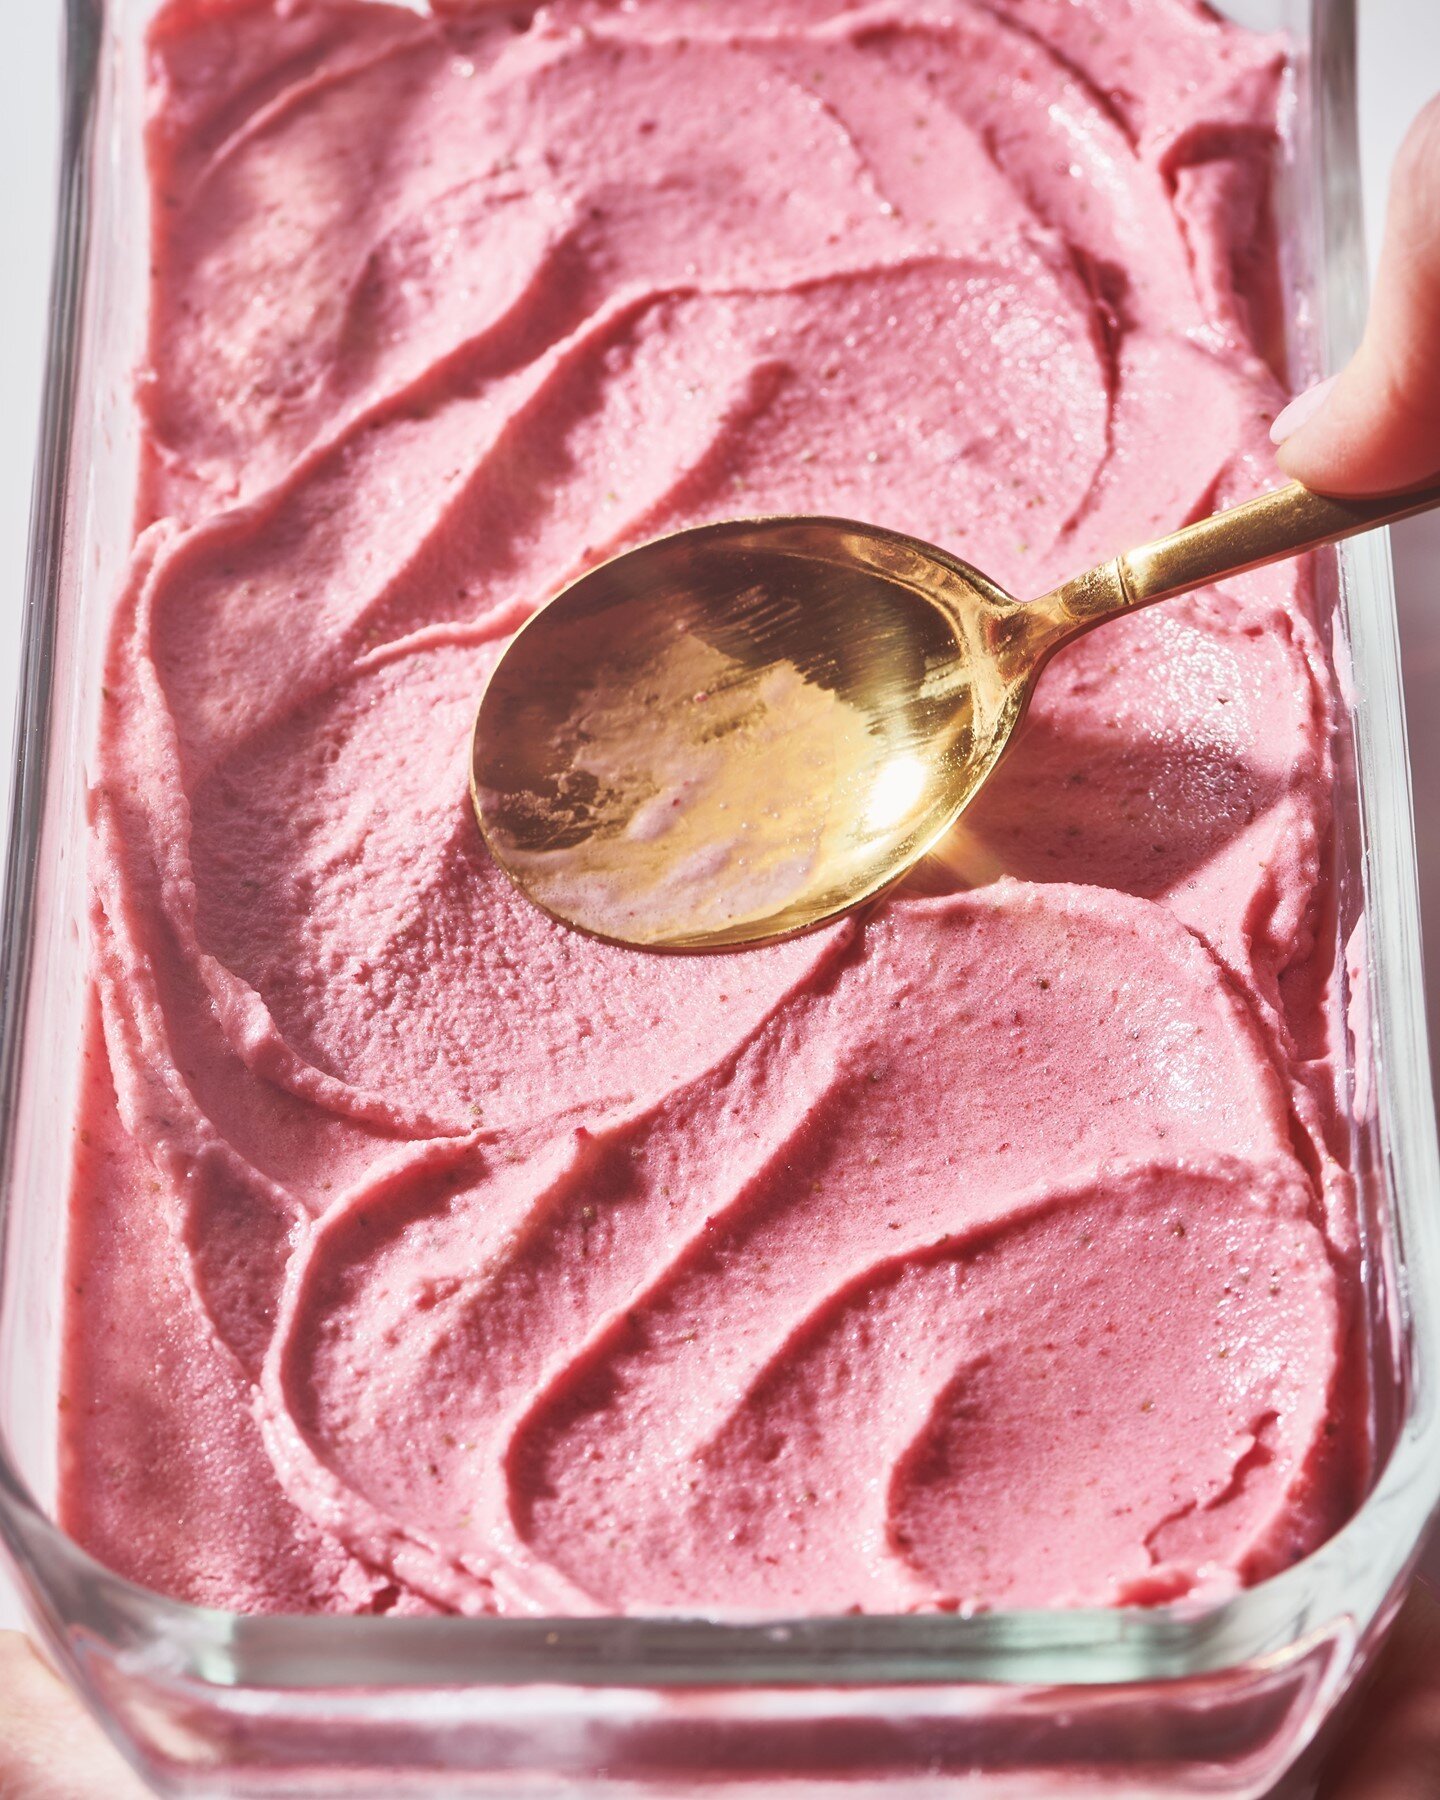 Did you know i's super easy to make ice cream without an ice cream maker? Not only that, but you can make it with 2 ingredients. You might even already own them!⁠
⁠
Check out the recipe and my revamped pictures of one of my favorites from the blog, a